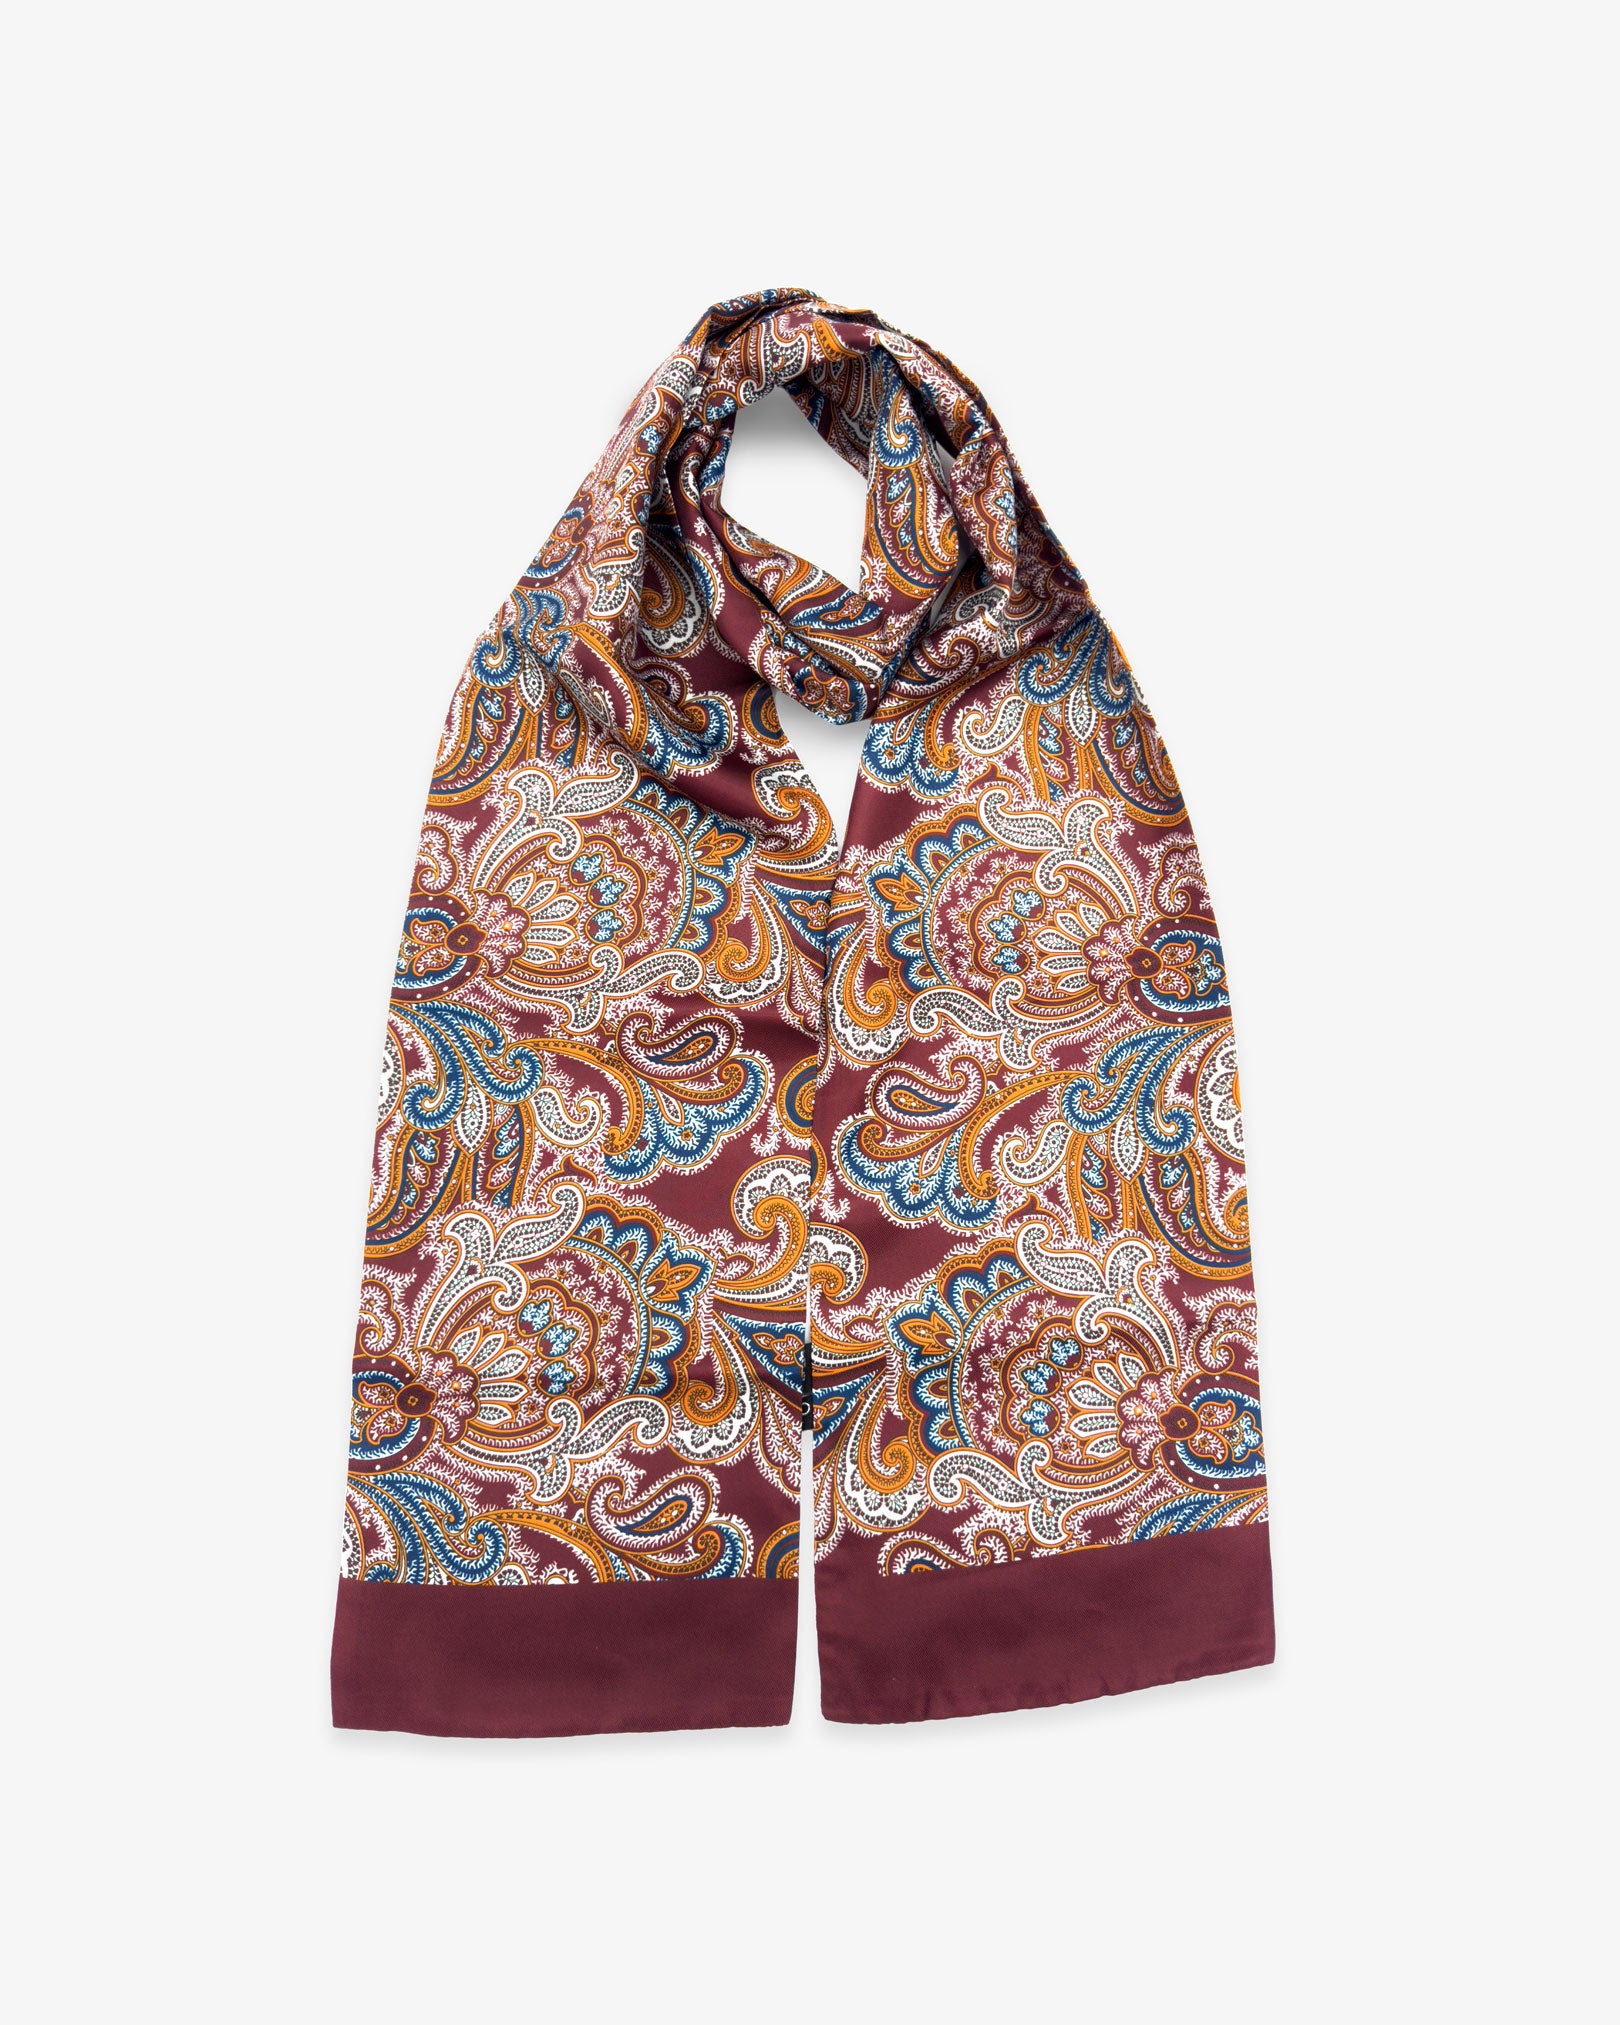 Looped view of the 'Fanelli' polyester scarf with both ends parallel, clearly showing the burgundy, dark blue and gold paisley design.